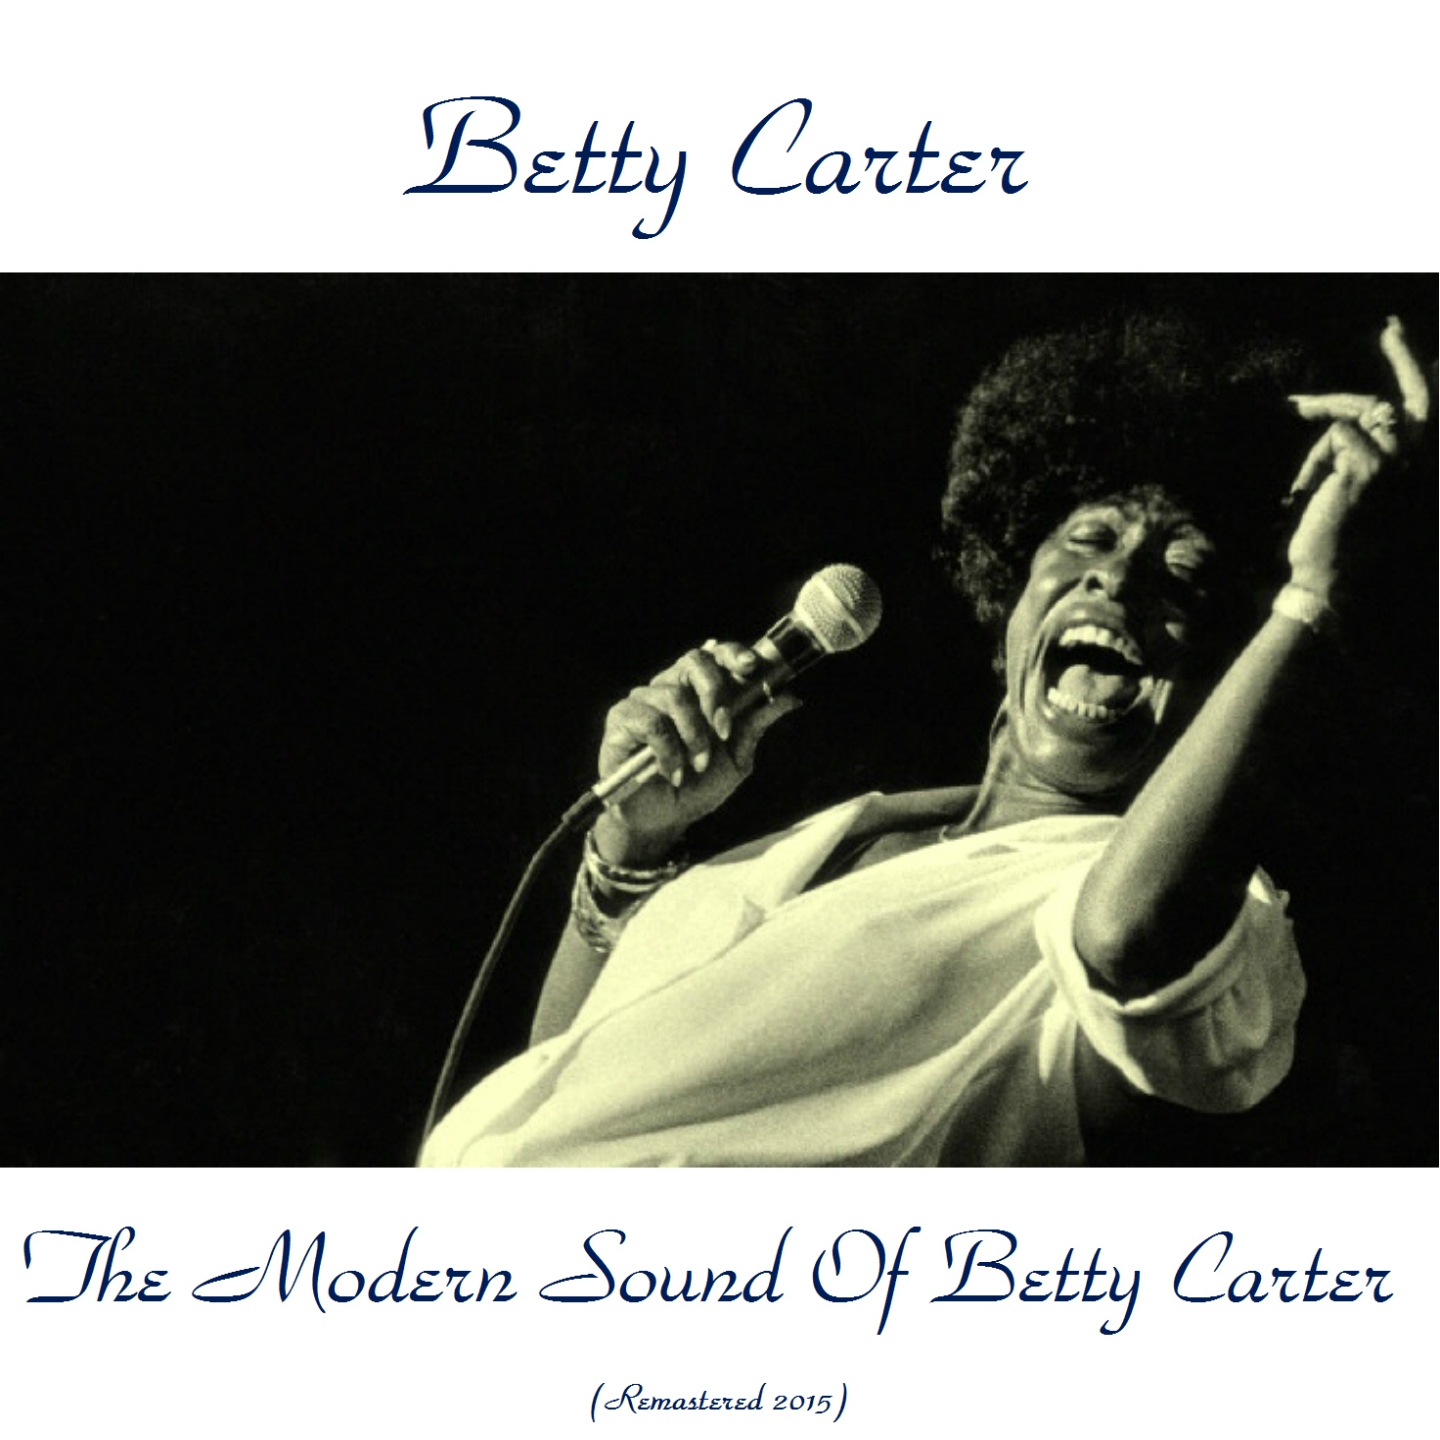 The Modern Sound of Betty Carter (Remastered 2015)